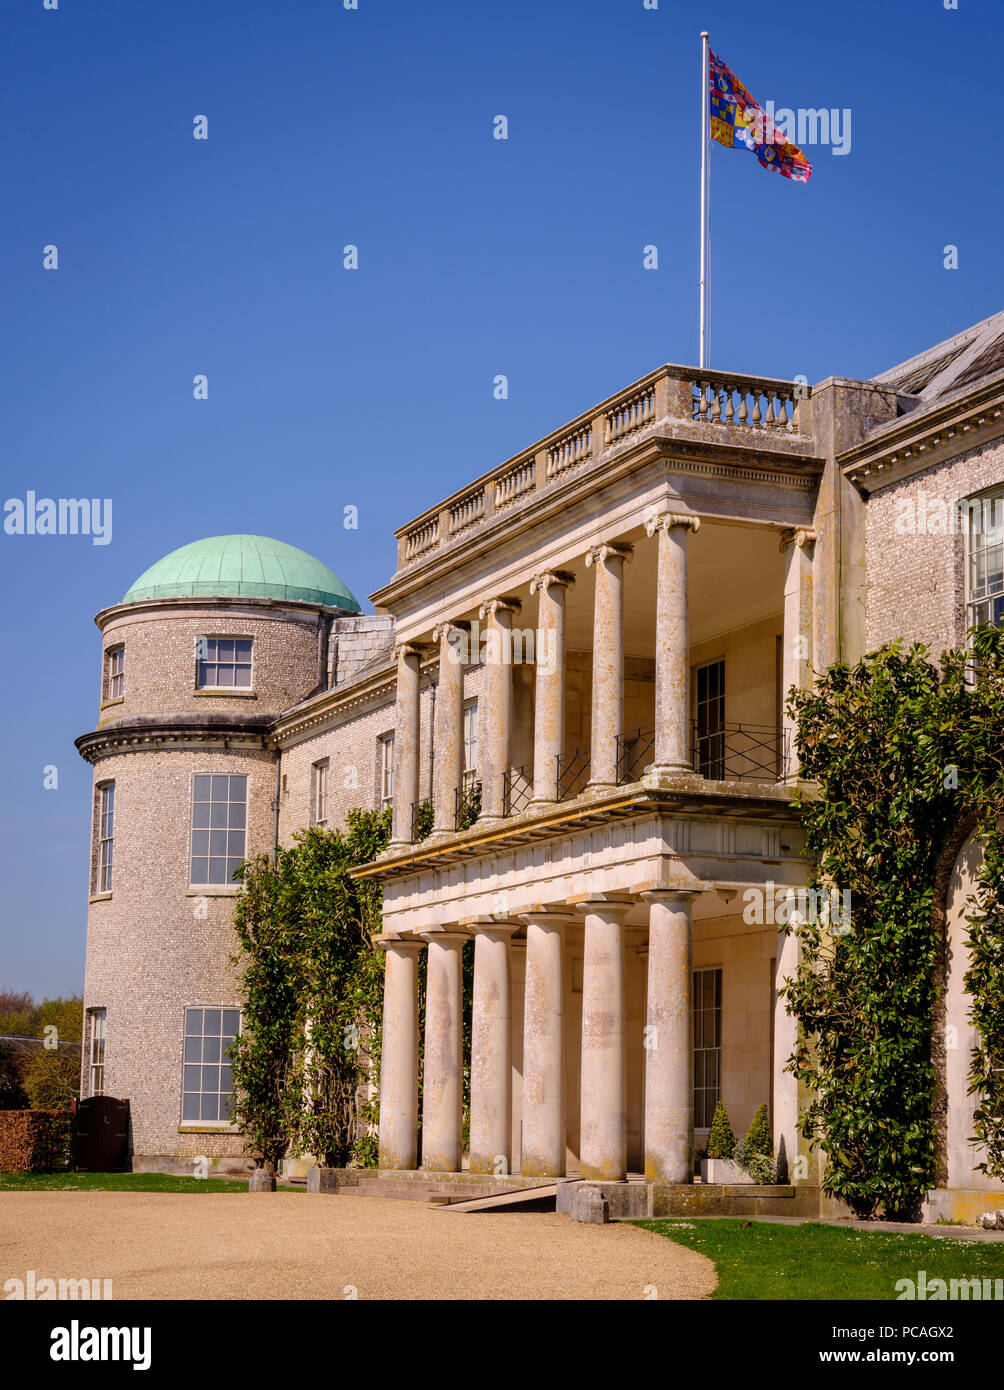 Goodwood House, a Goodwood station wagon, West Sussex Regno Unito. Foto Stock